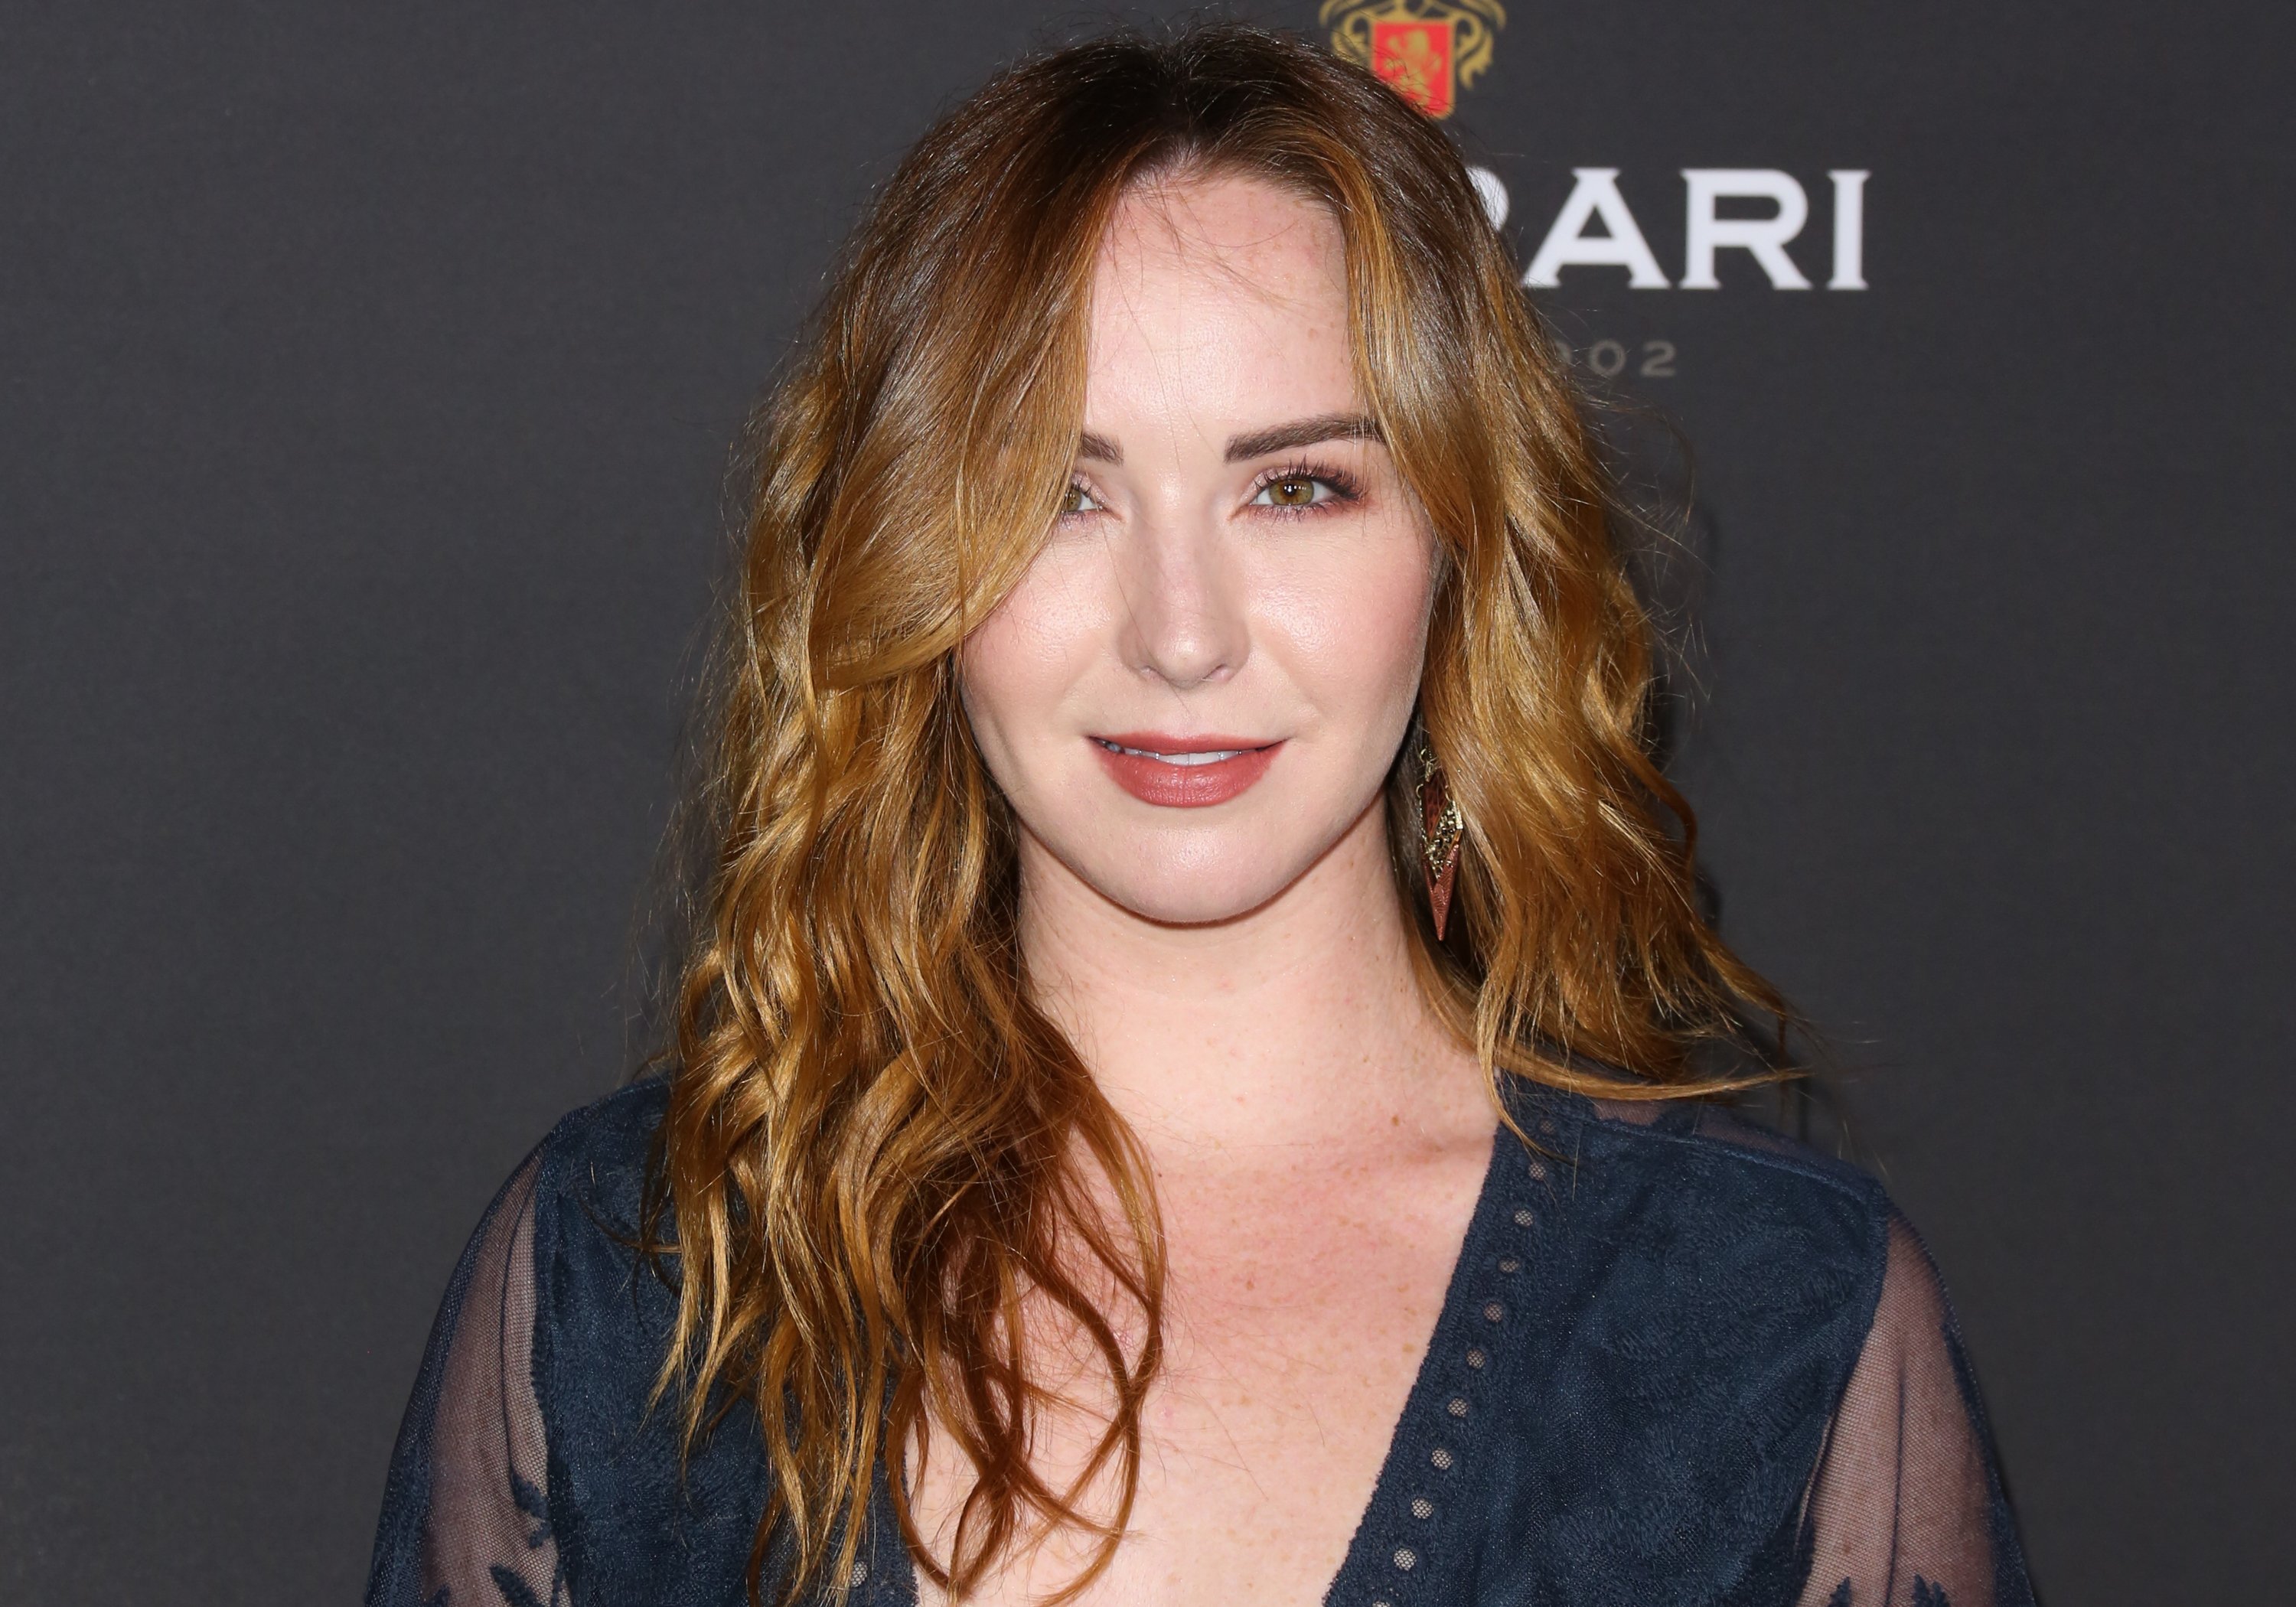 'The Young and the Restless' actor Camryn Grimes wearing a blue dress, and posing on the red carpet.